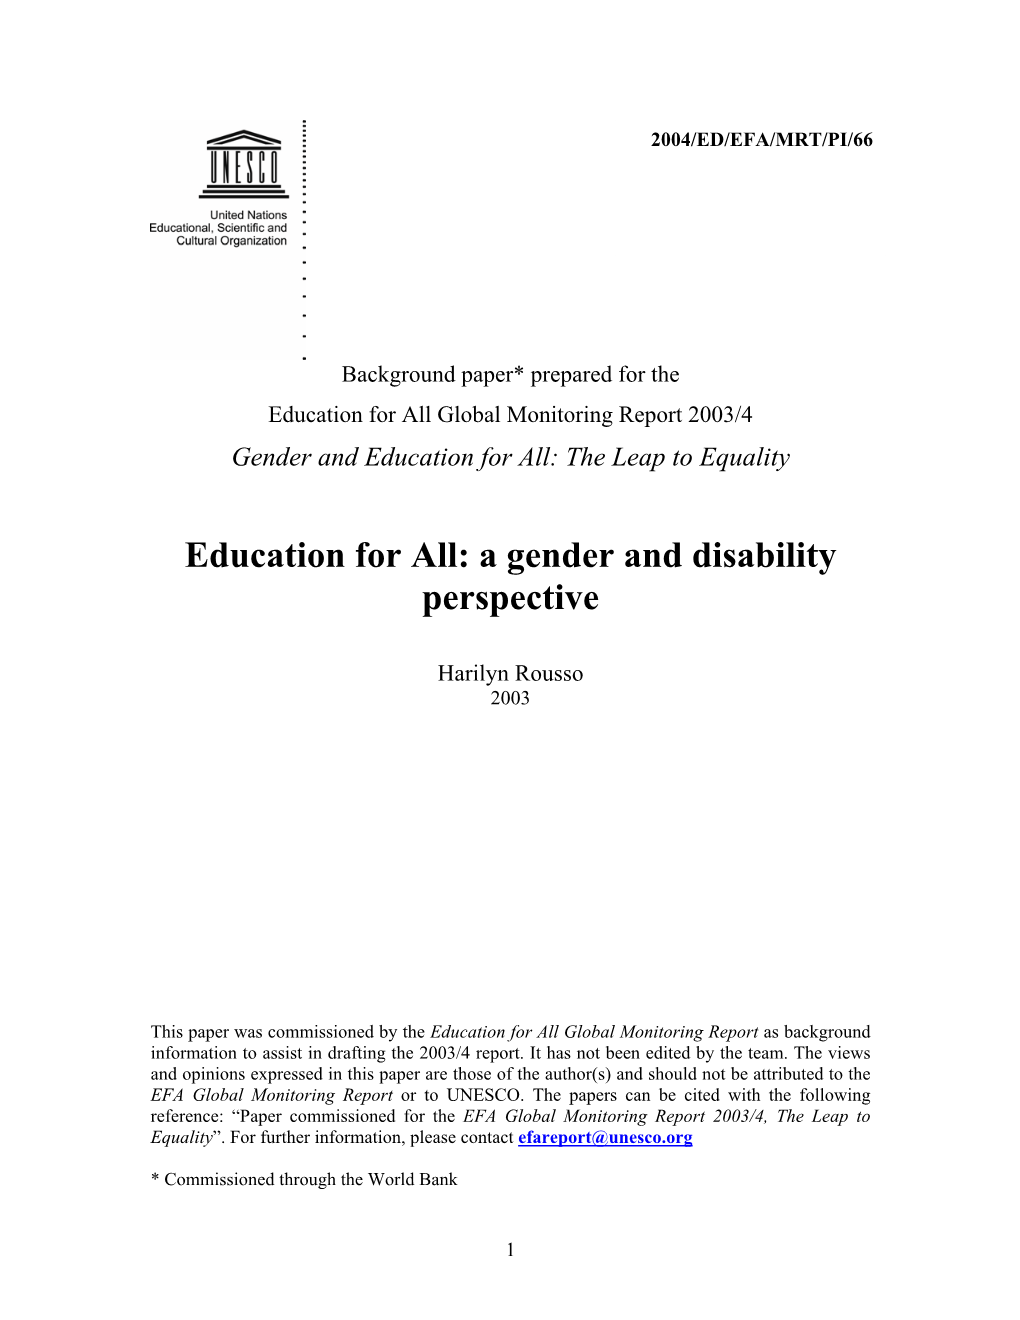 Education for All: a Gender and Disability Perspective